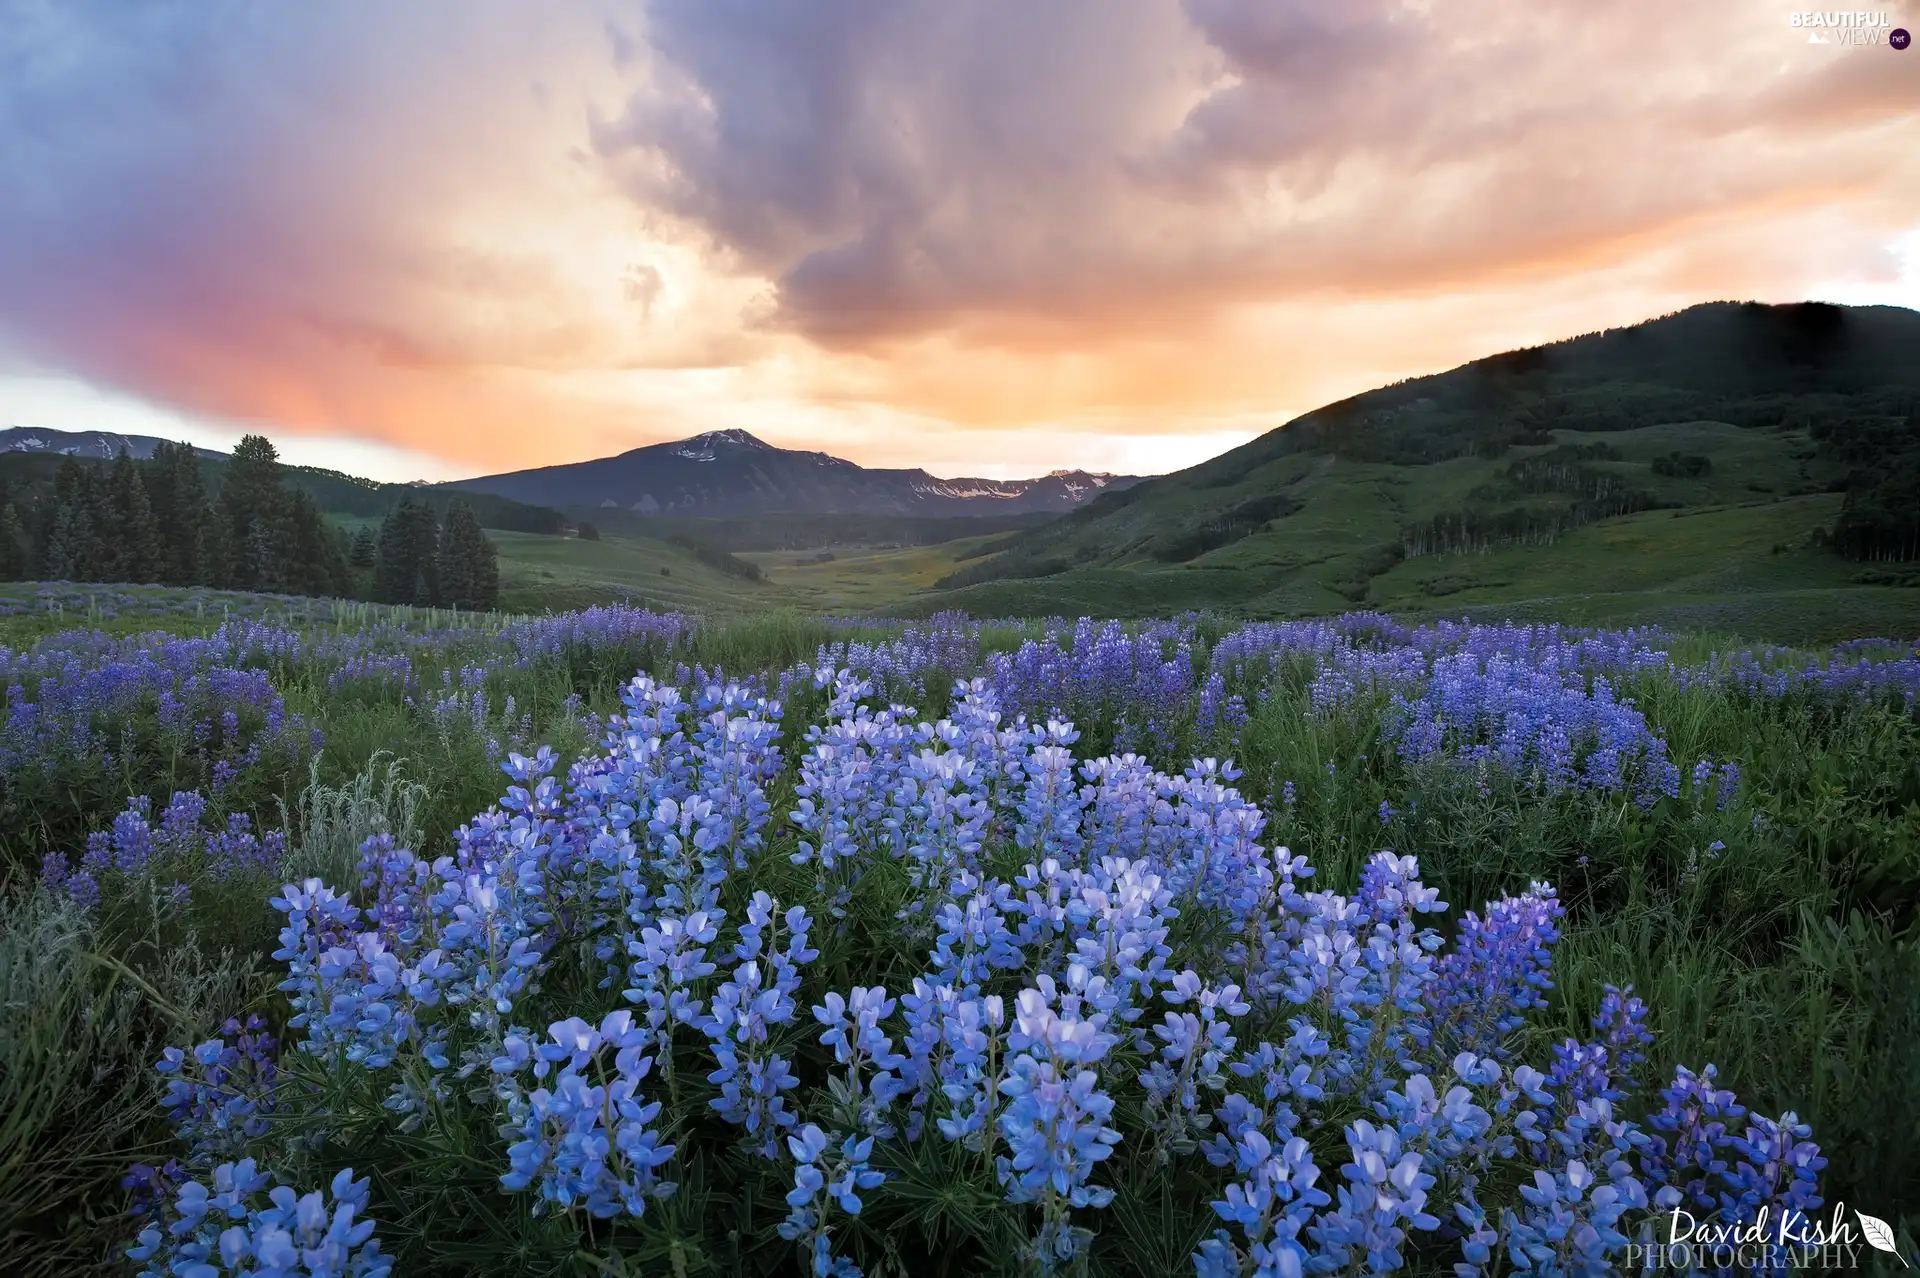 Mountains, Meadow, lupine, The Hills